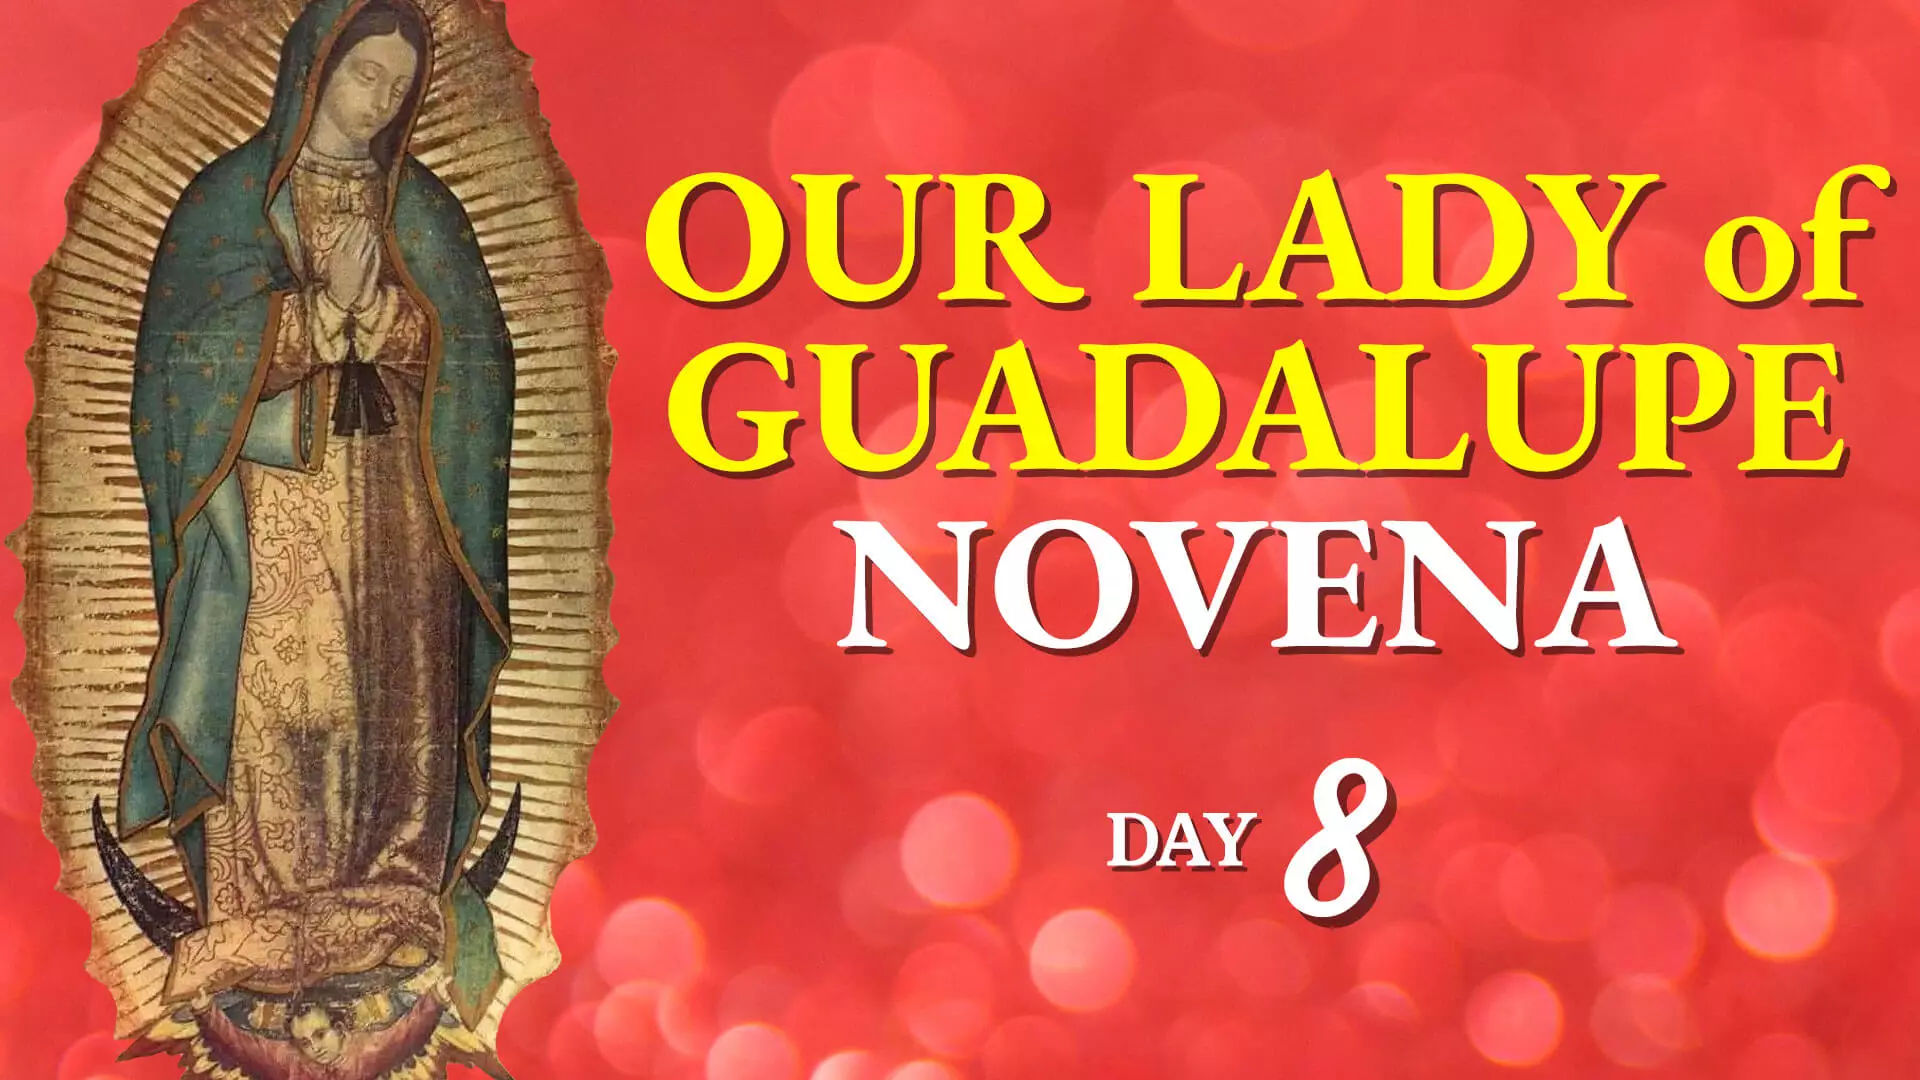 Our Lady of Guadalupe Novena Day 8